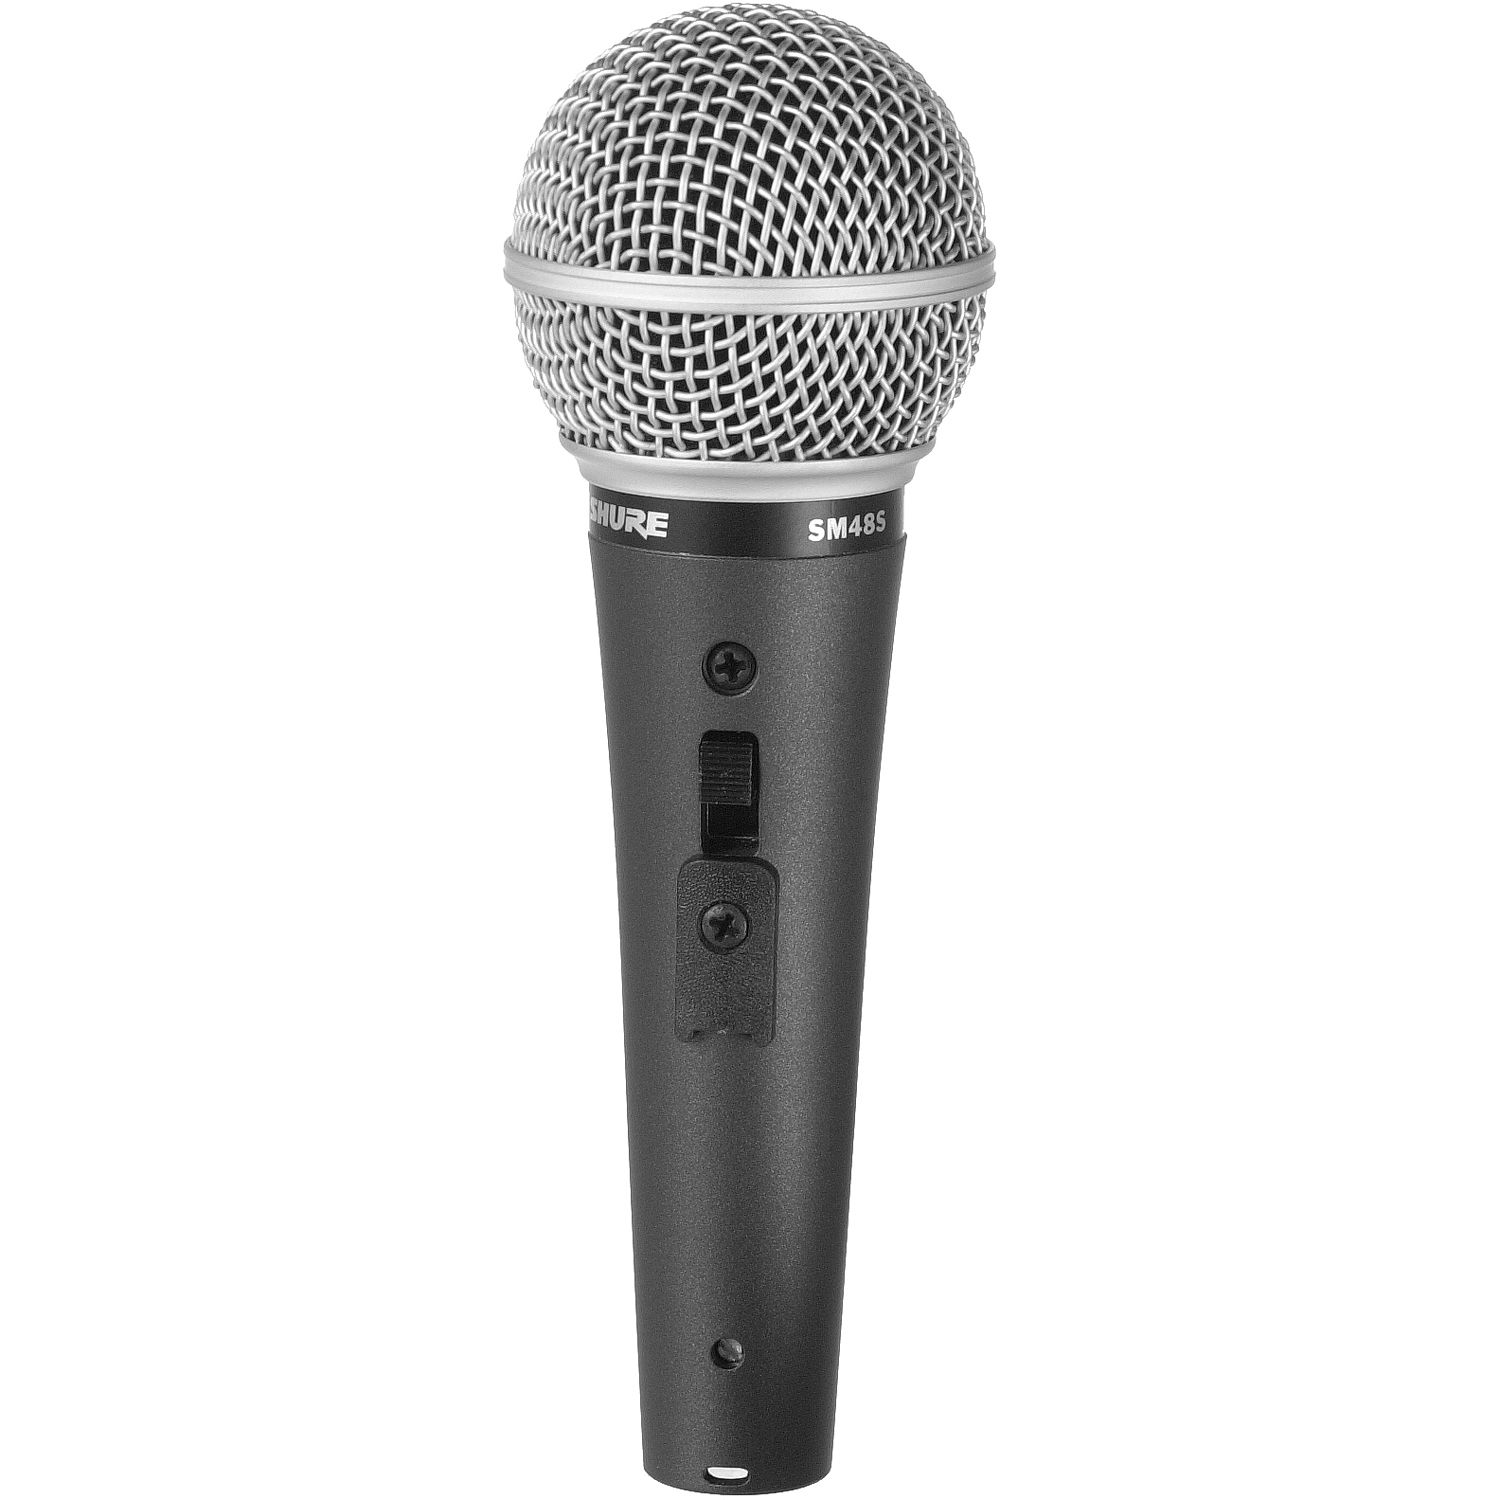 Shure SM48s microphone